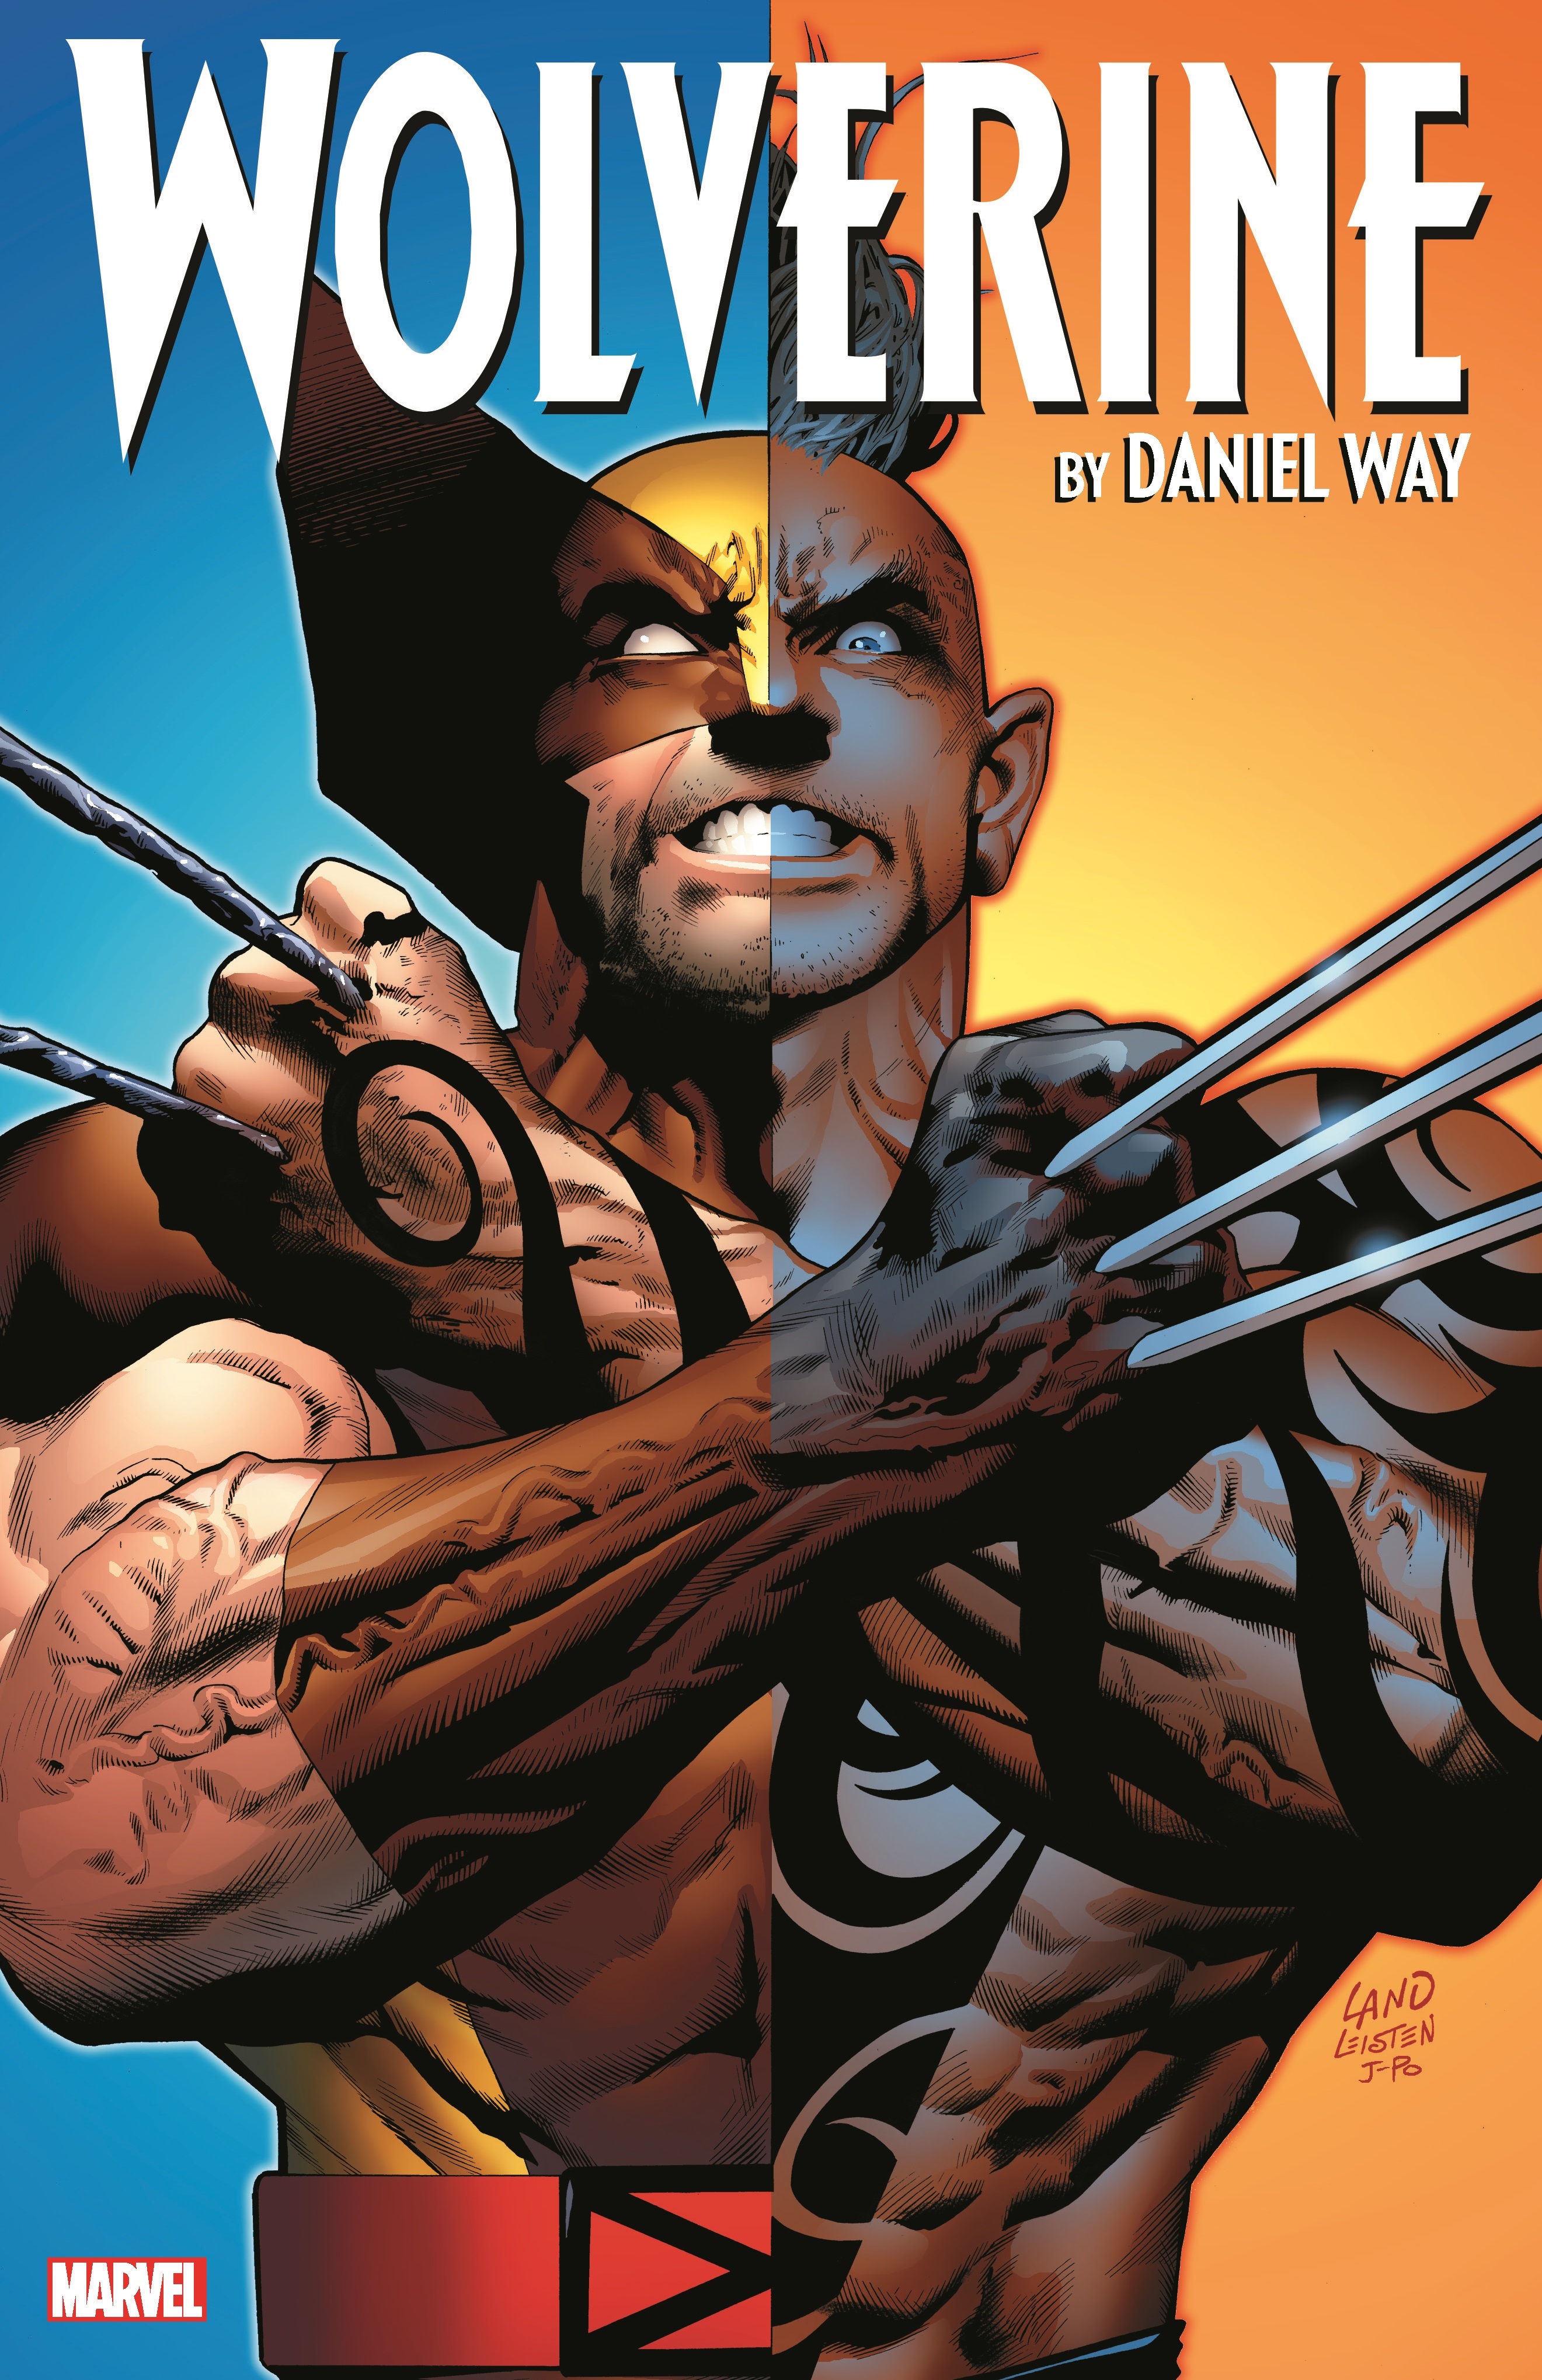 Wolverine by Daniel Way: The Complete Collection Vol. 3 (Trade Paperback)